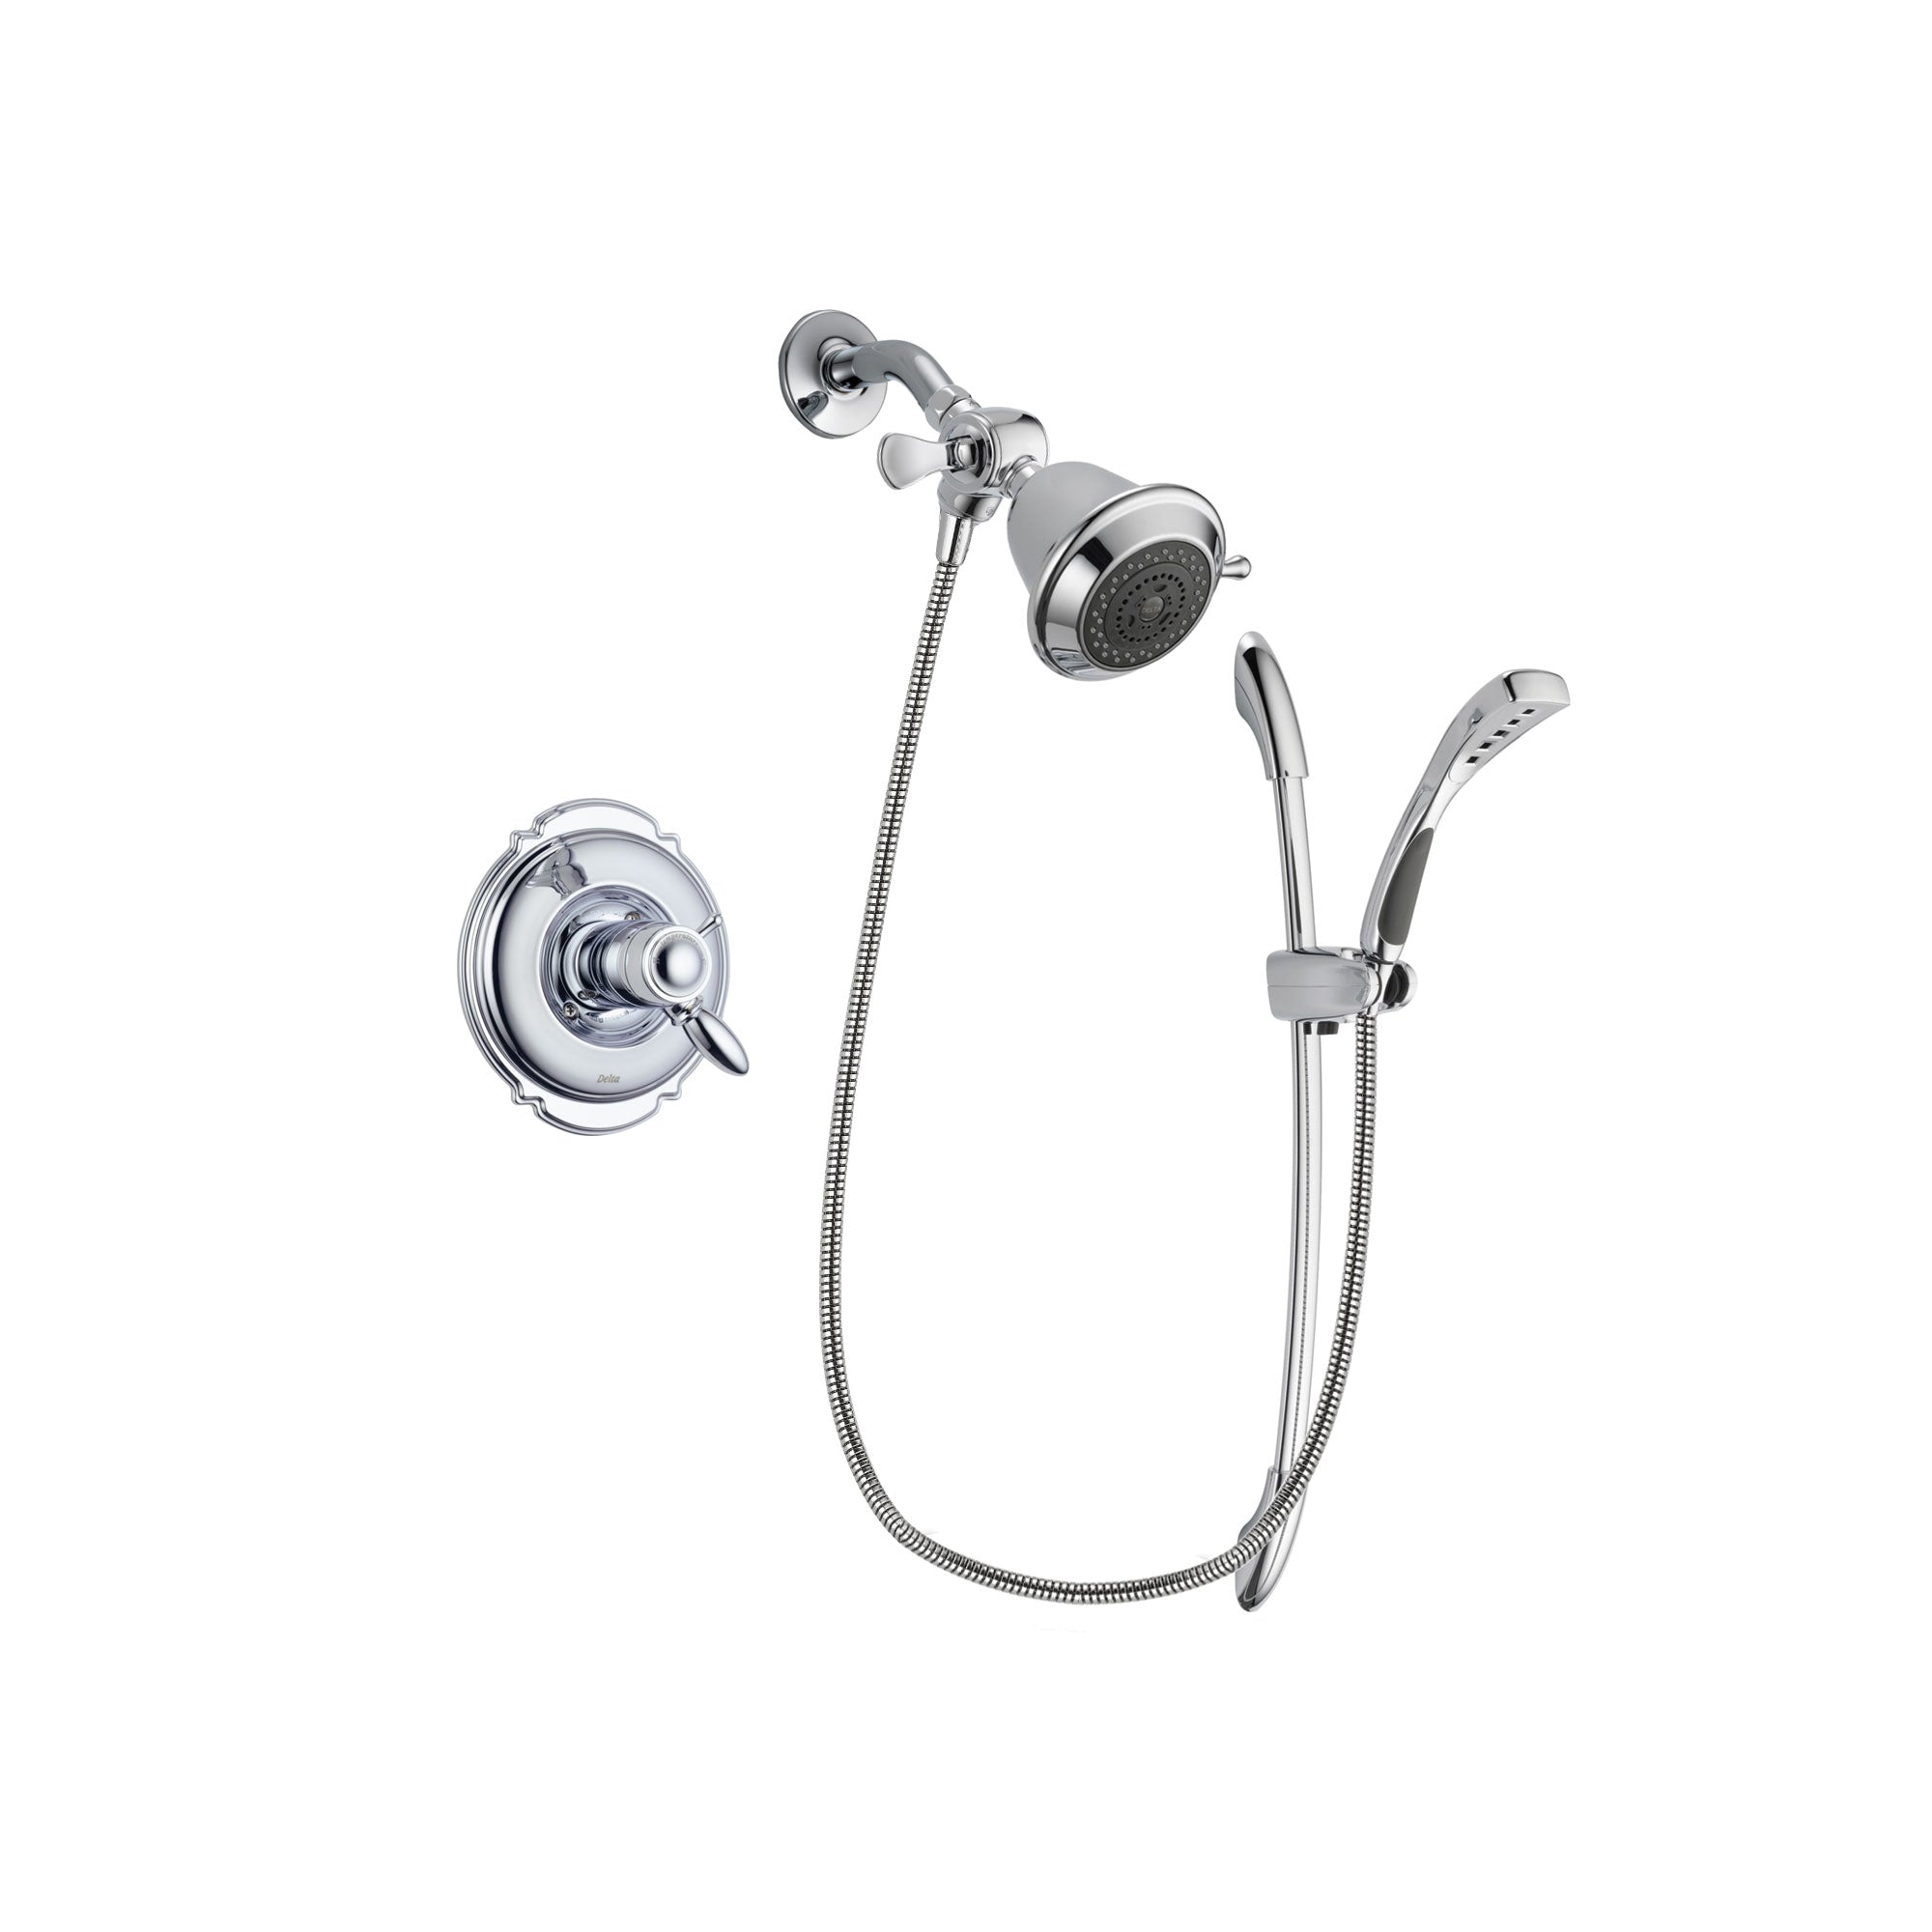 Delta Victorian Chrome Finish Thermostatic Shower Faucet System Package with Shower Head and Handheld Shower with Slide Bar Includes Rough-in Valve DSP0428V